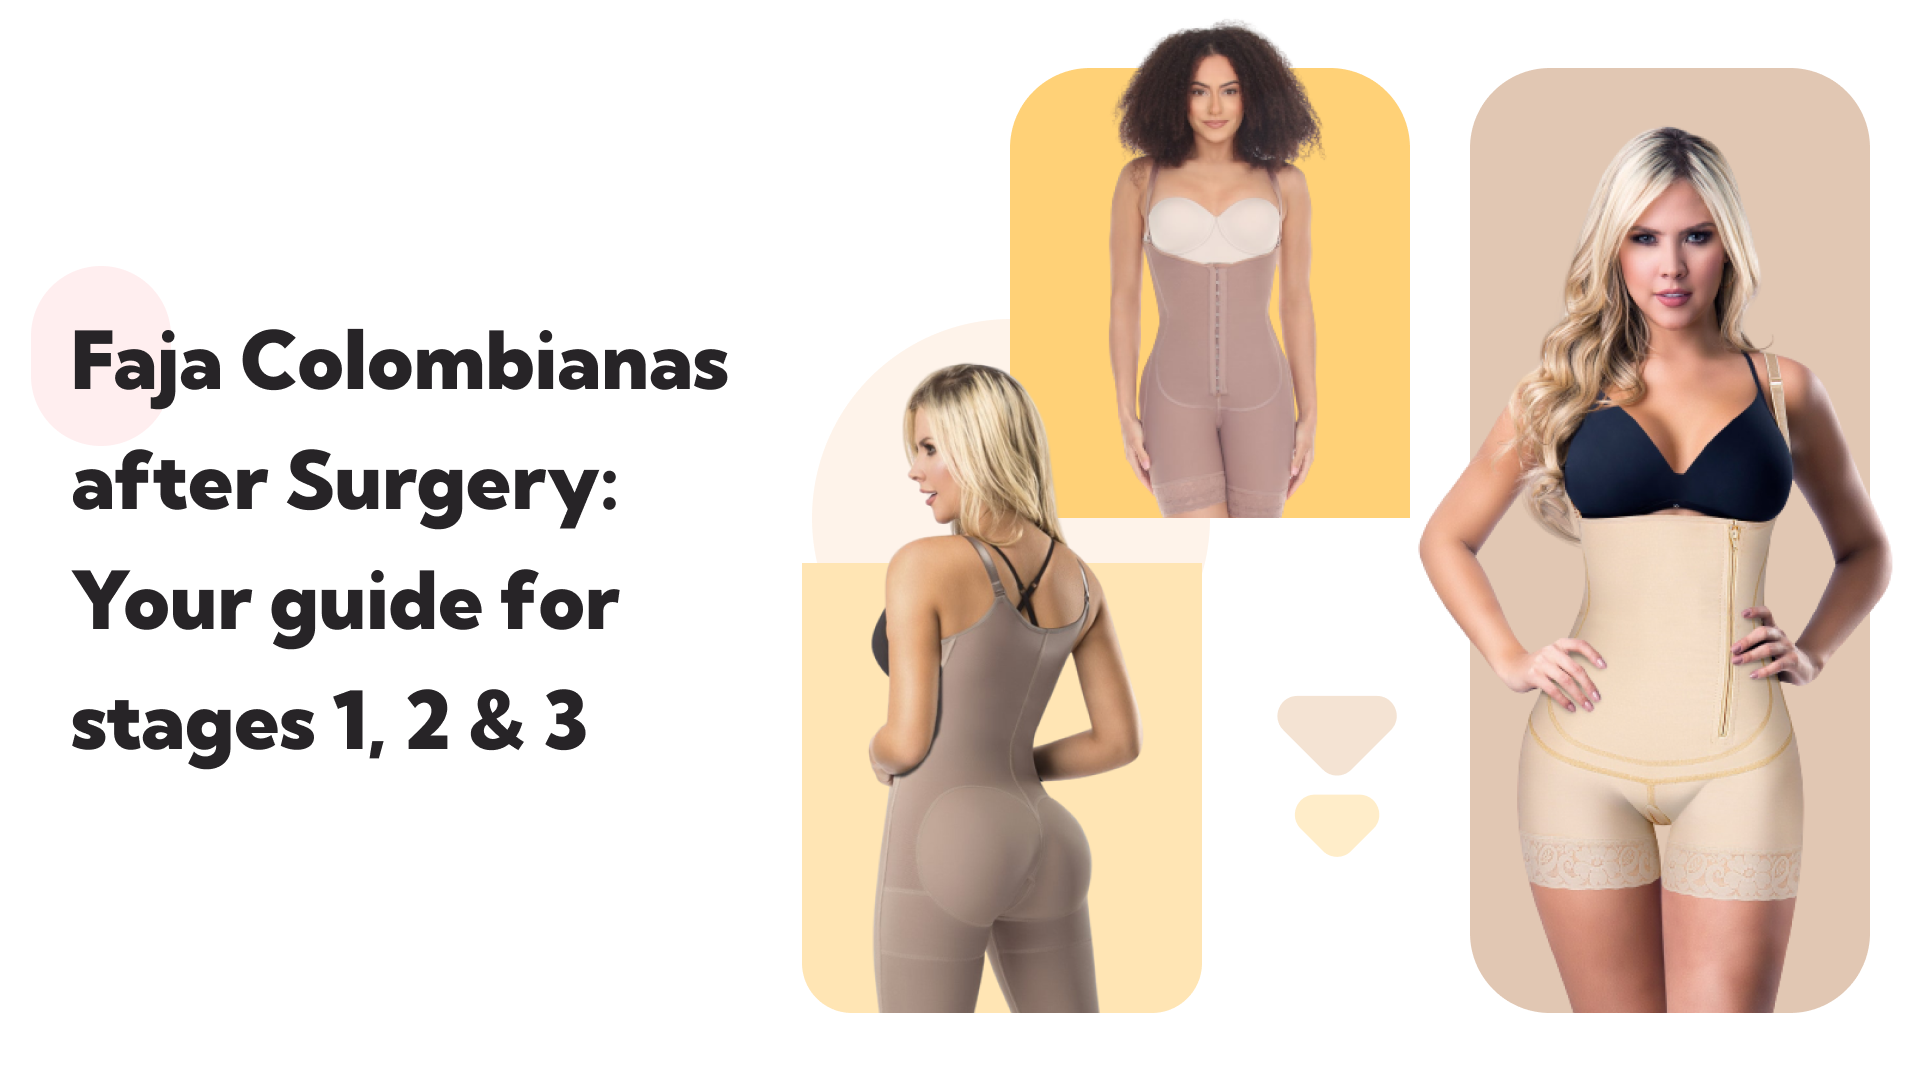 Faja Colombianas after Surgery: Your Guide for Stages 1, 2 & 3